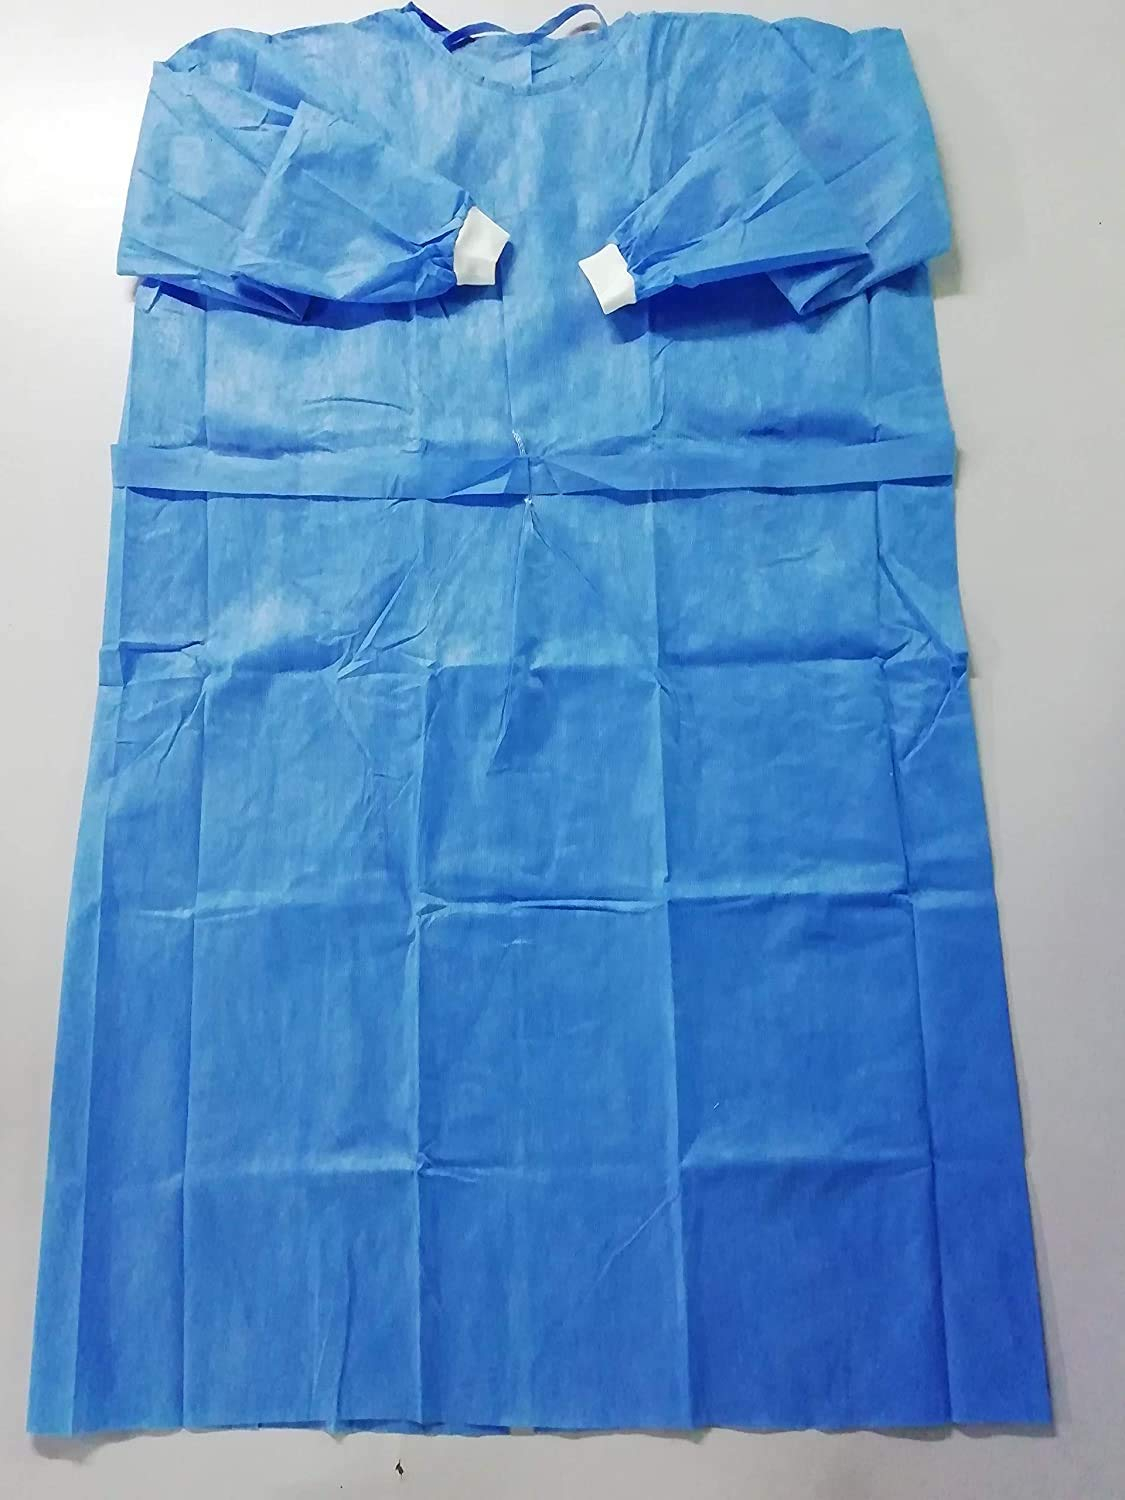 Custom Hospital Disposable AAMI Medical Gowns,Hospital Disposable AAMI  Medical Gowns suppliers,Hospital Disposable AAMI Medical Gowns  manufacturers - C&P